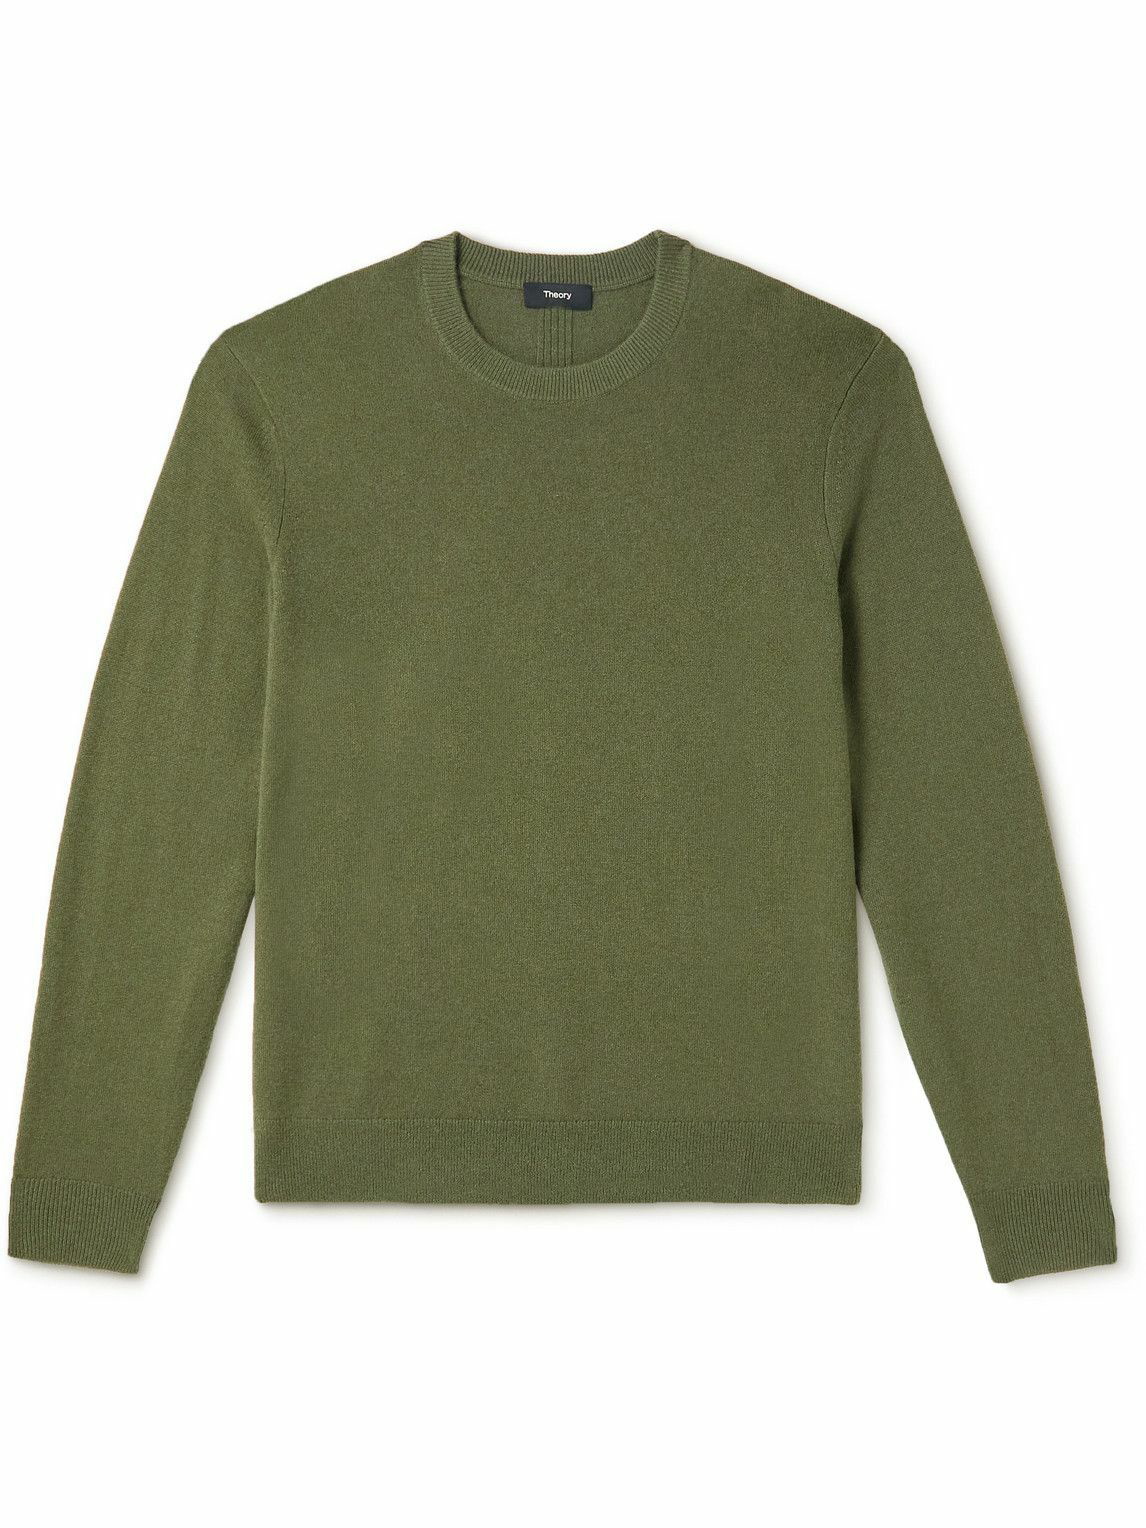 Theory - Hilles Cashmere Sweater - Green Theory